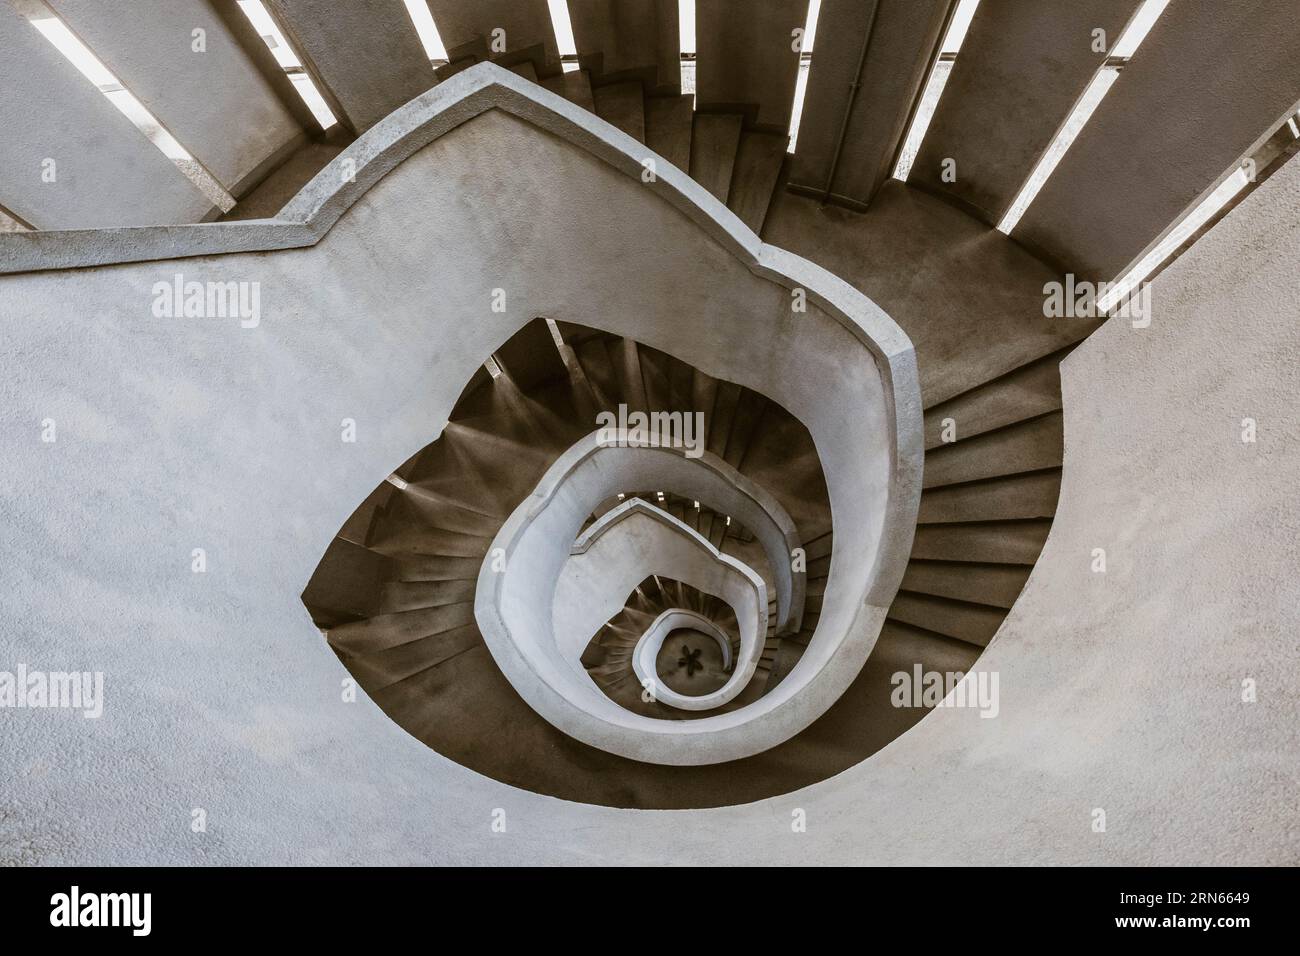 spiral staircase, vintage stairway, way downwards Stock Photo